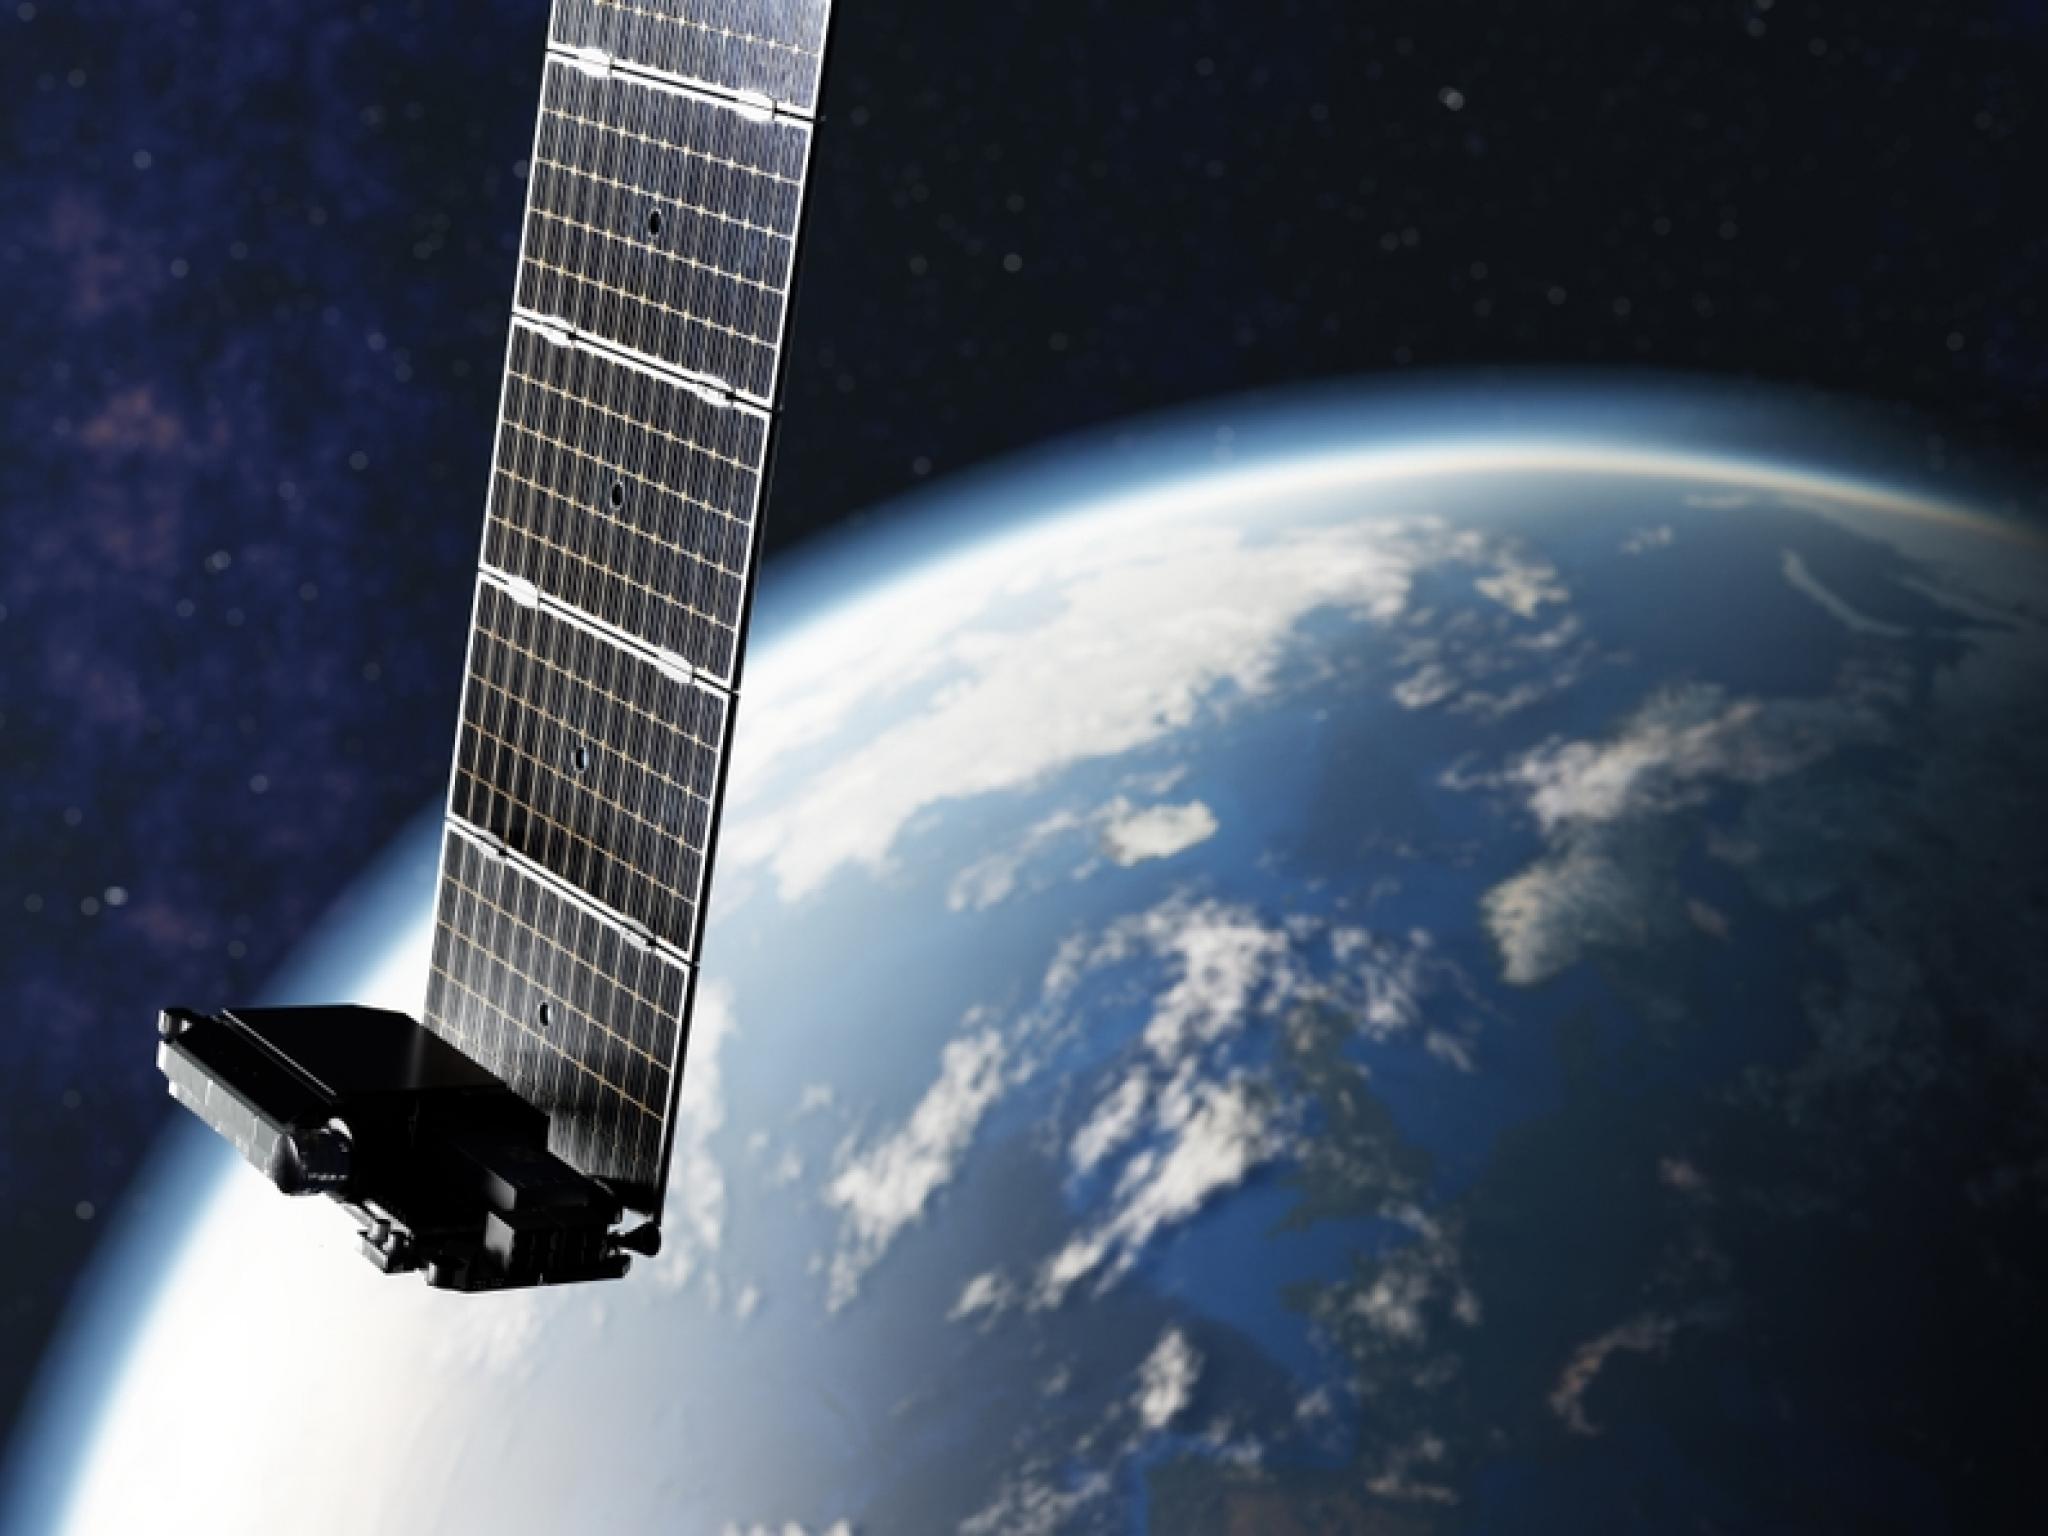  israel-hamas-conflict-shines-light-on-critical-role-of-space-sector 